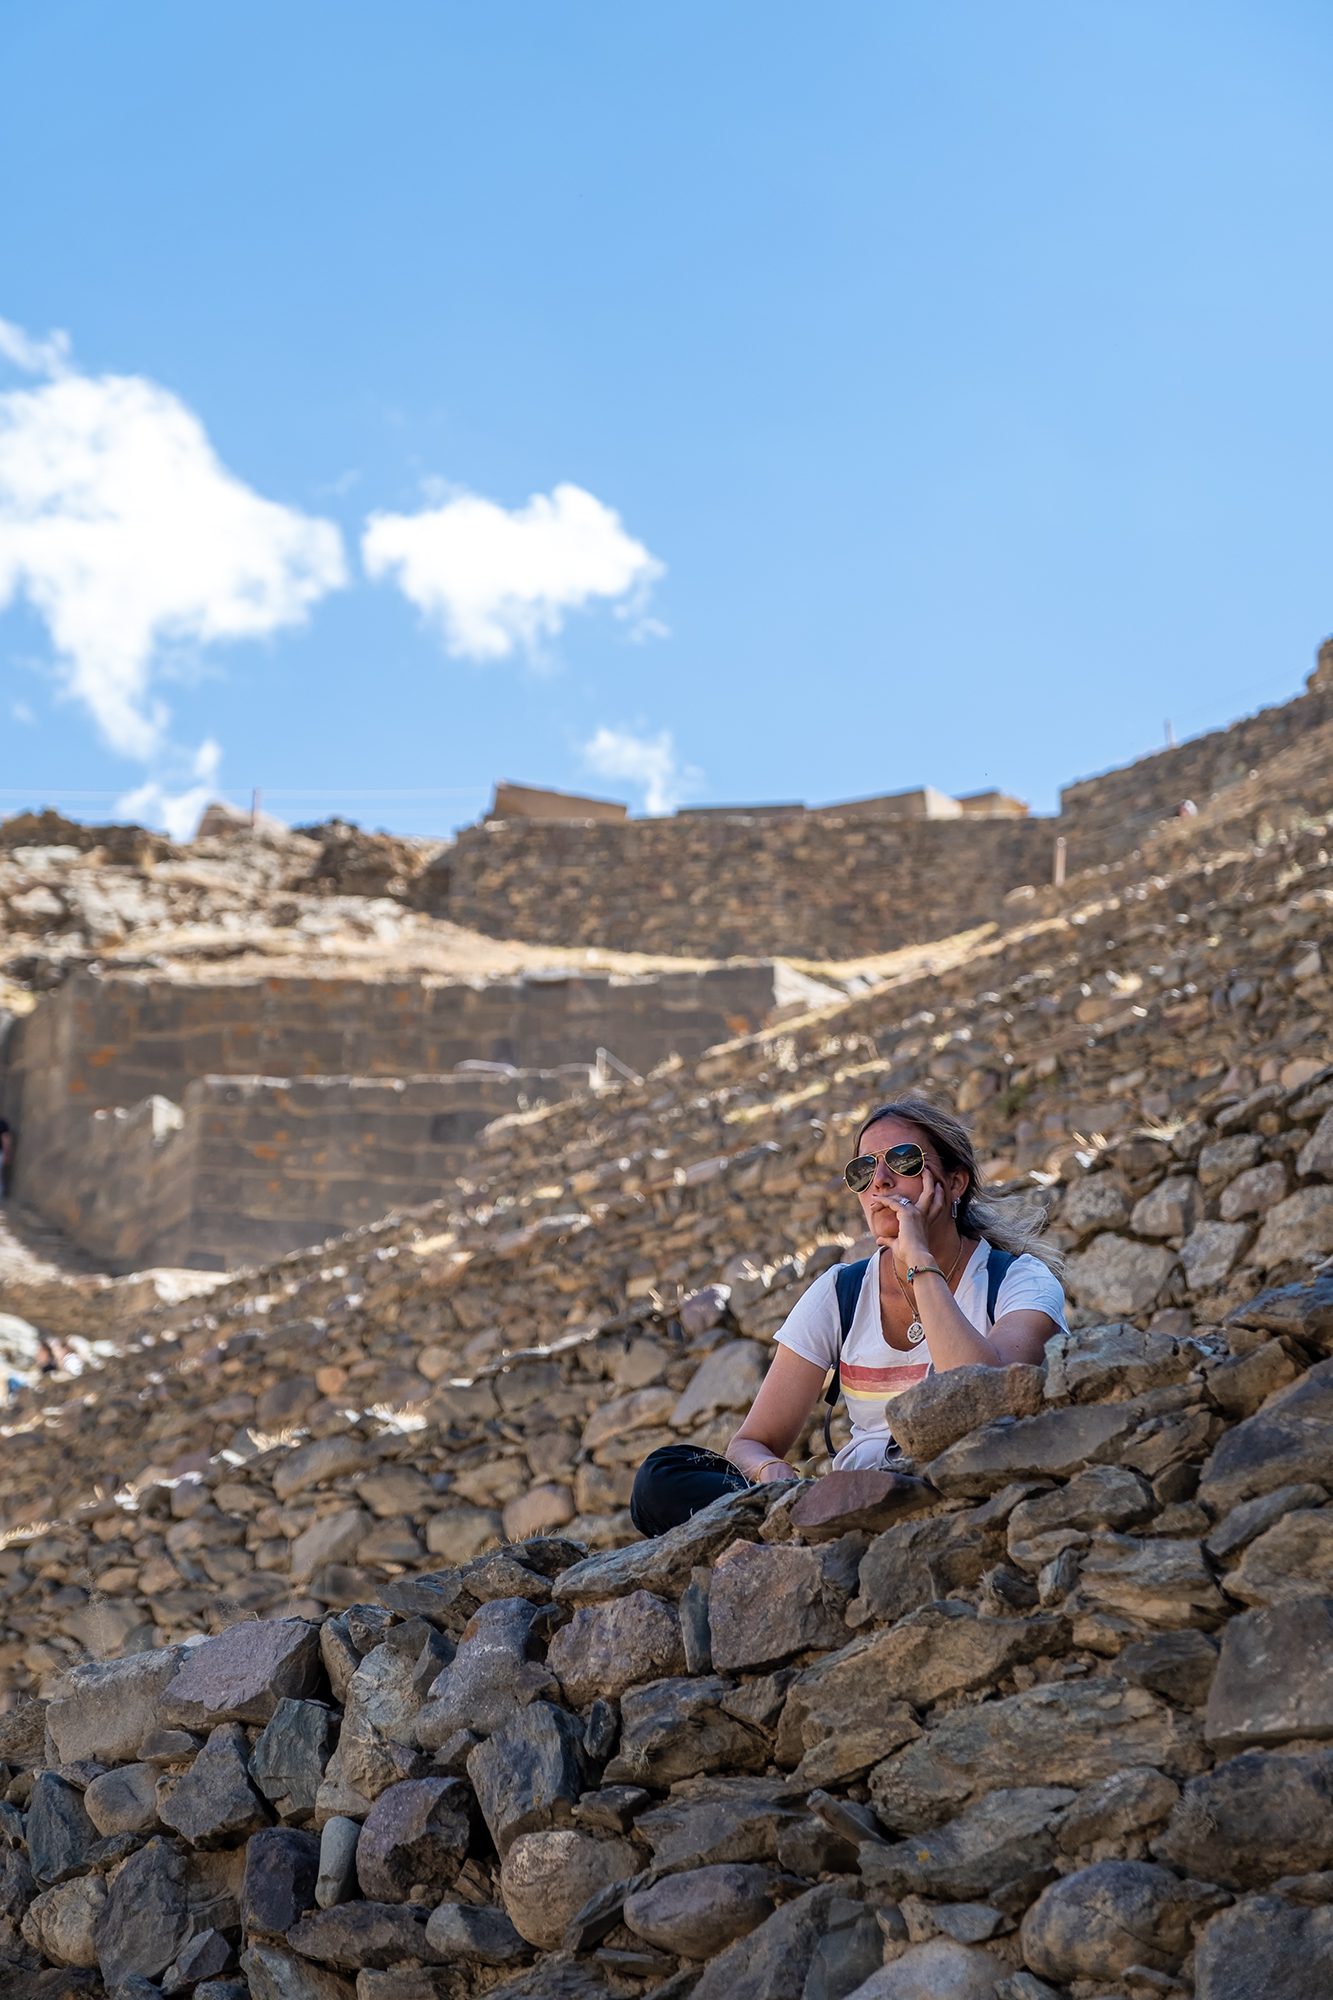 Woman sitting on some stones in an Inca ruin